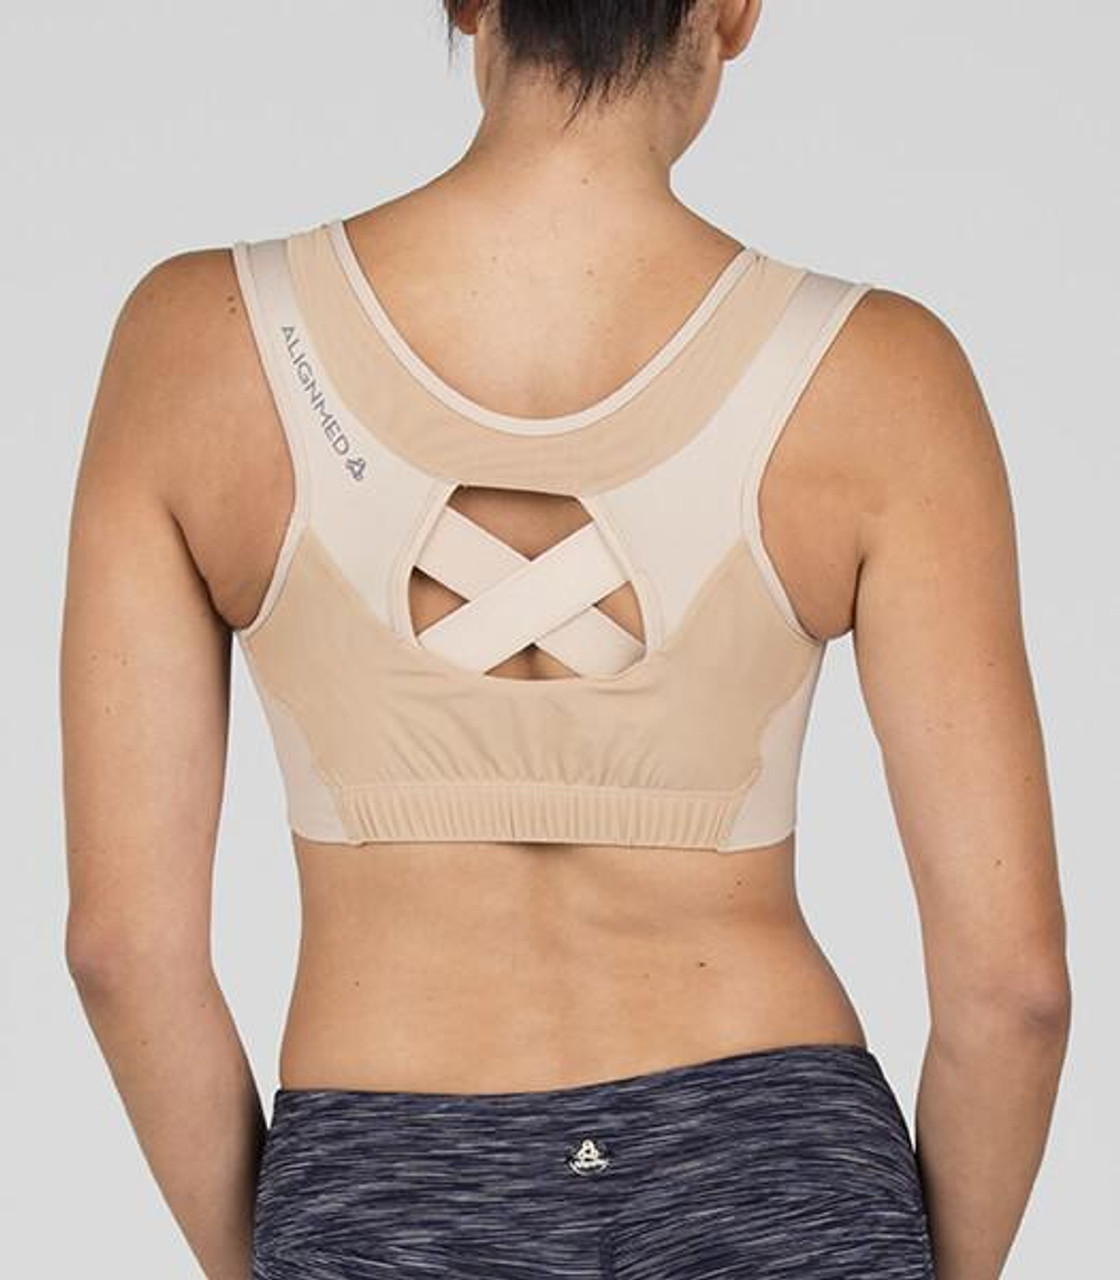  ALIGNMED Posture Sports Bra Seamless, Increase Upper Body  Strength & Oxygen Intake, Improve Support During Exercise & Shoulder  Mechanics for All Fitness Activities